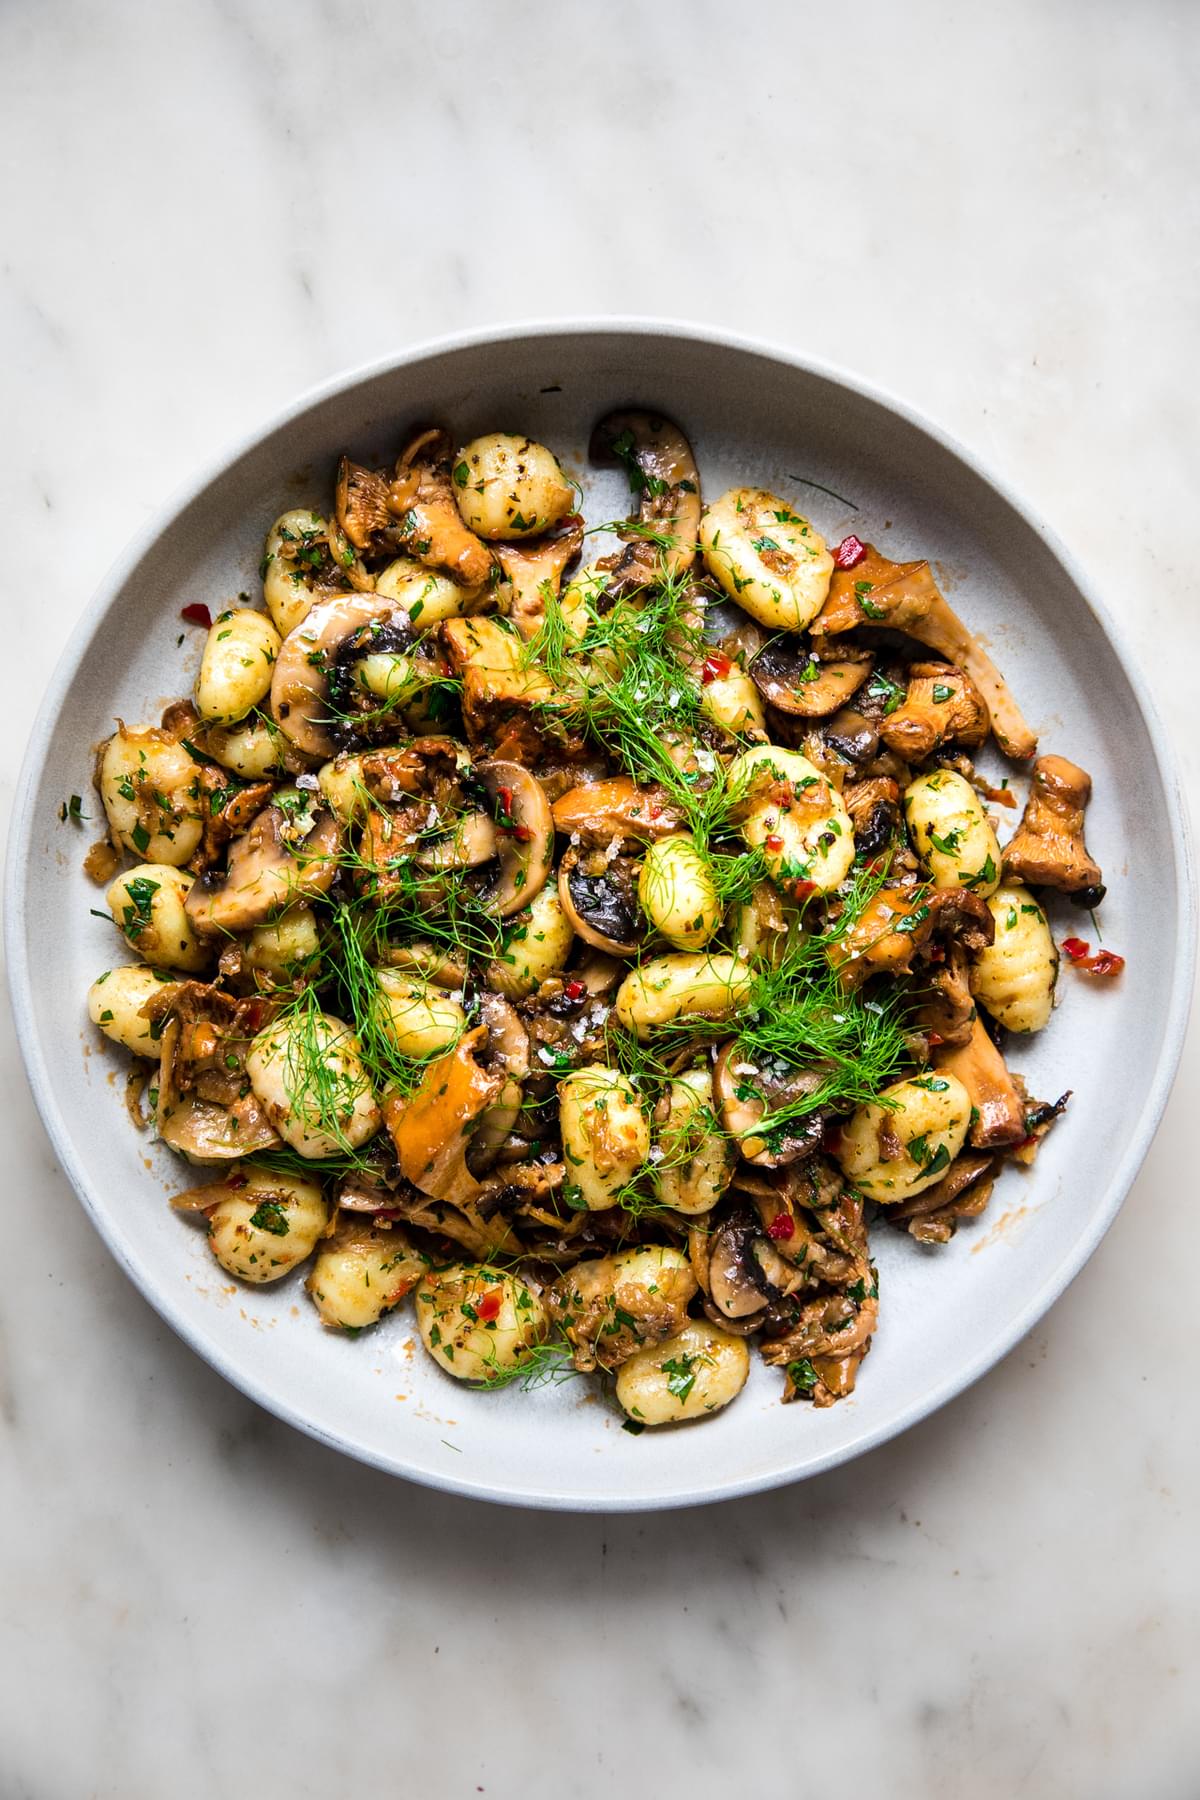 homemade Spicy Gnocchi with Fennel and Mushrooms in a bowl